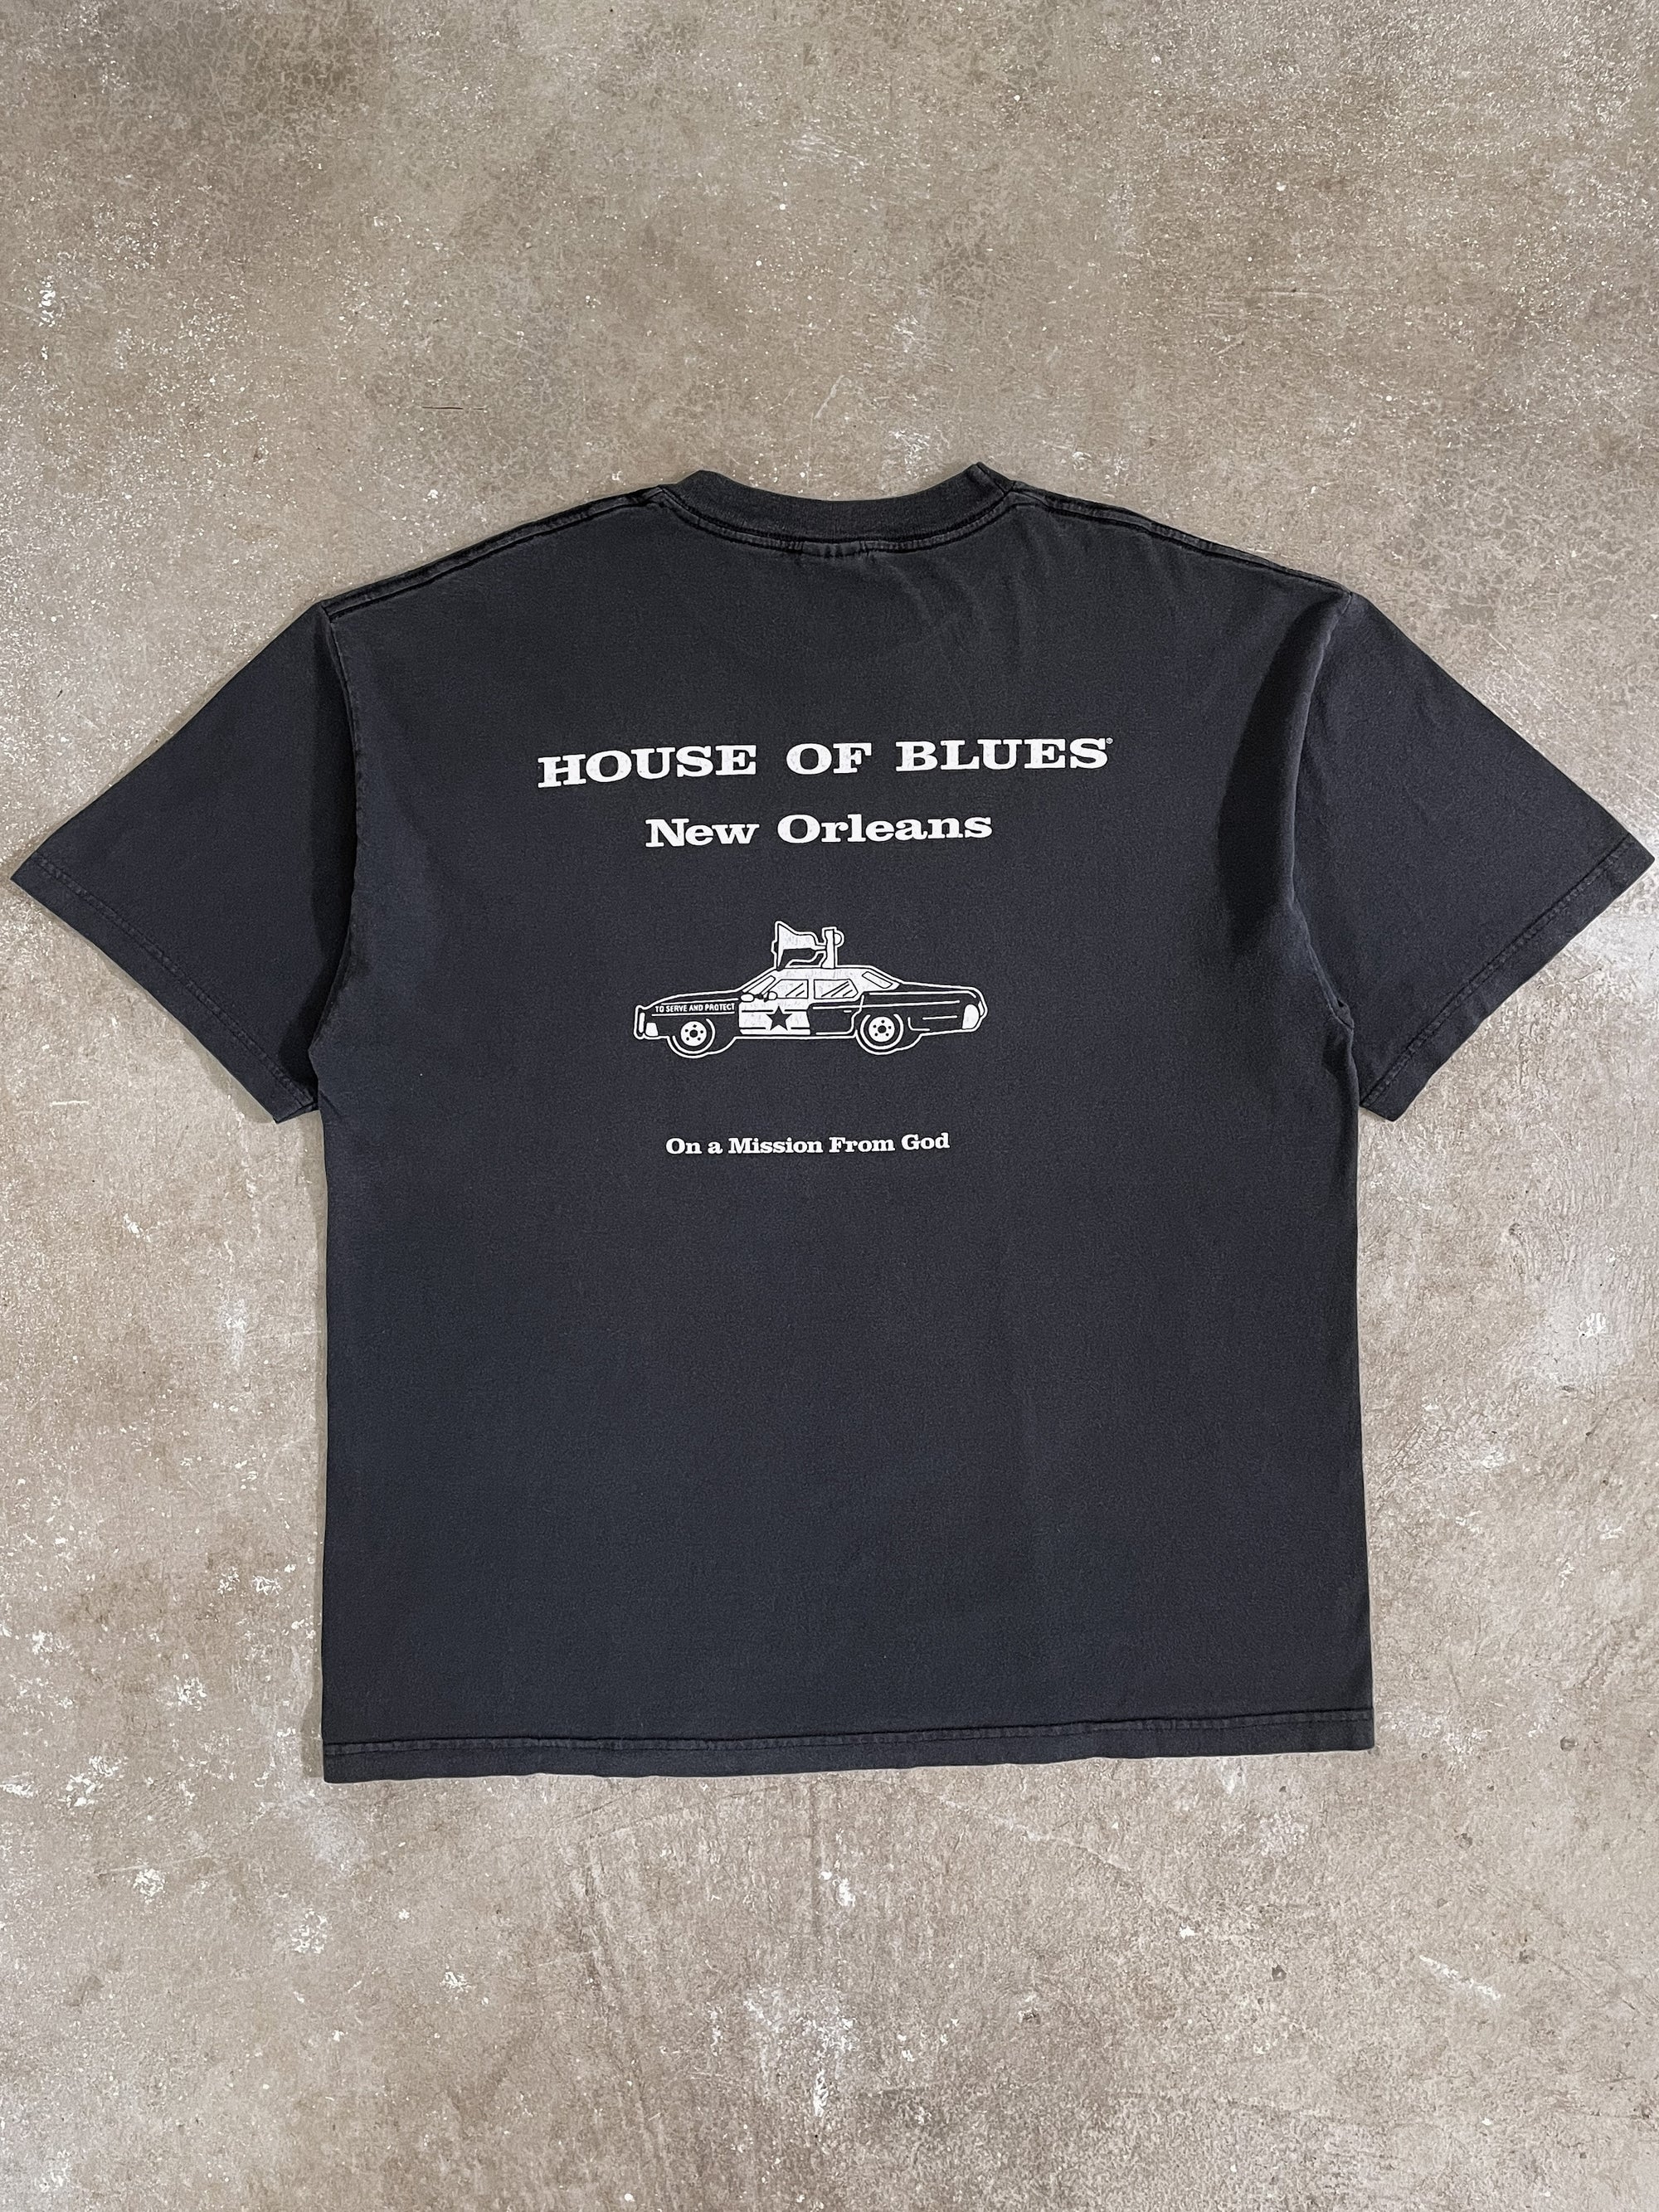 1990s “House of Blues” Tee (XL)